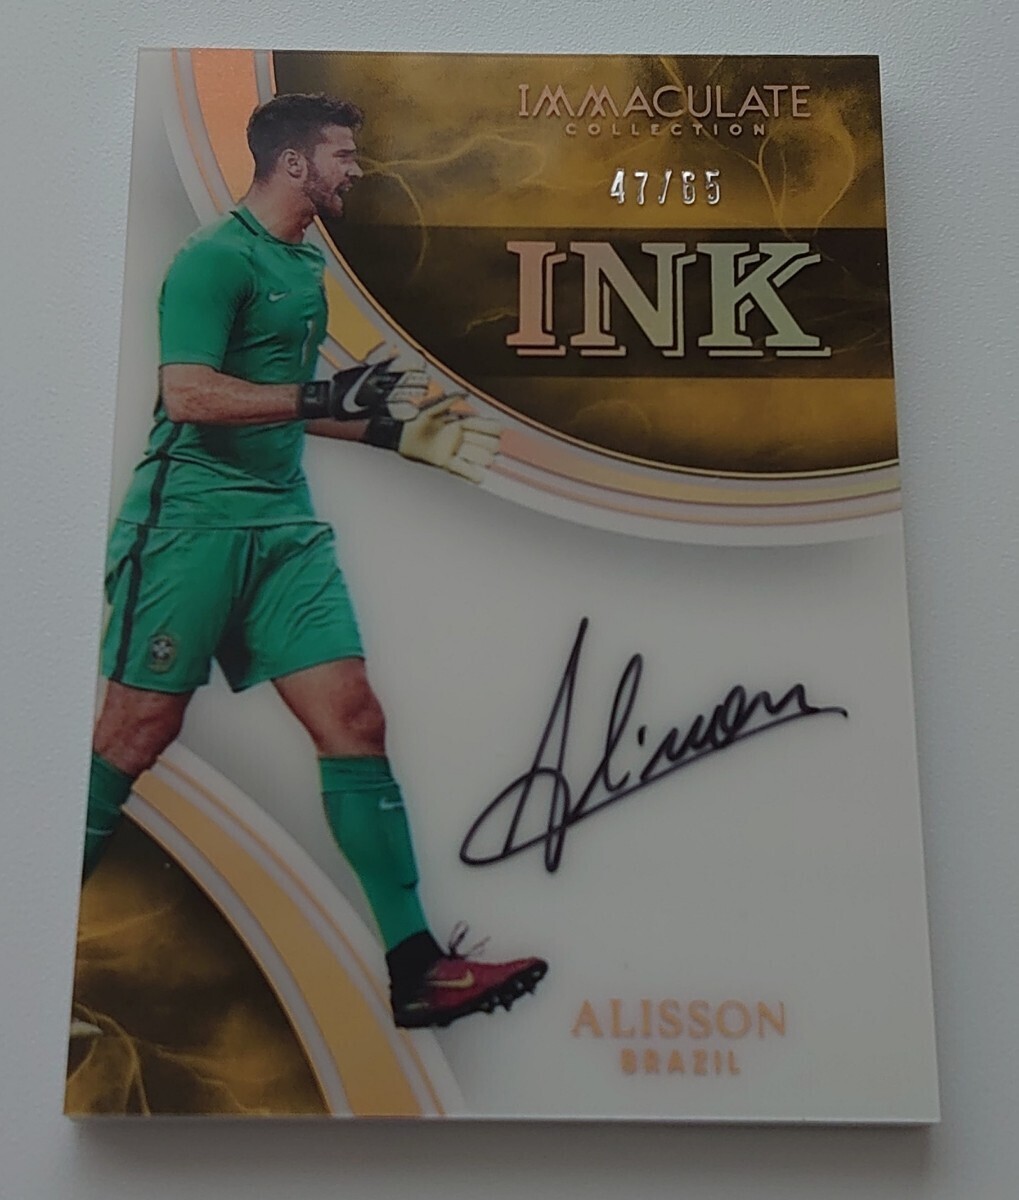 2017 PANINI IMMACULATE COLLECTION SOCCER ALISSON AUTOGRAPH CARD /65 INK LIVERPOOL アリソン ブラジル代表 リバプール サイン カード